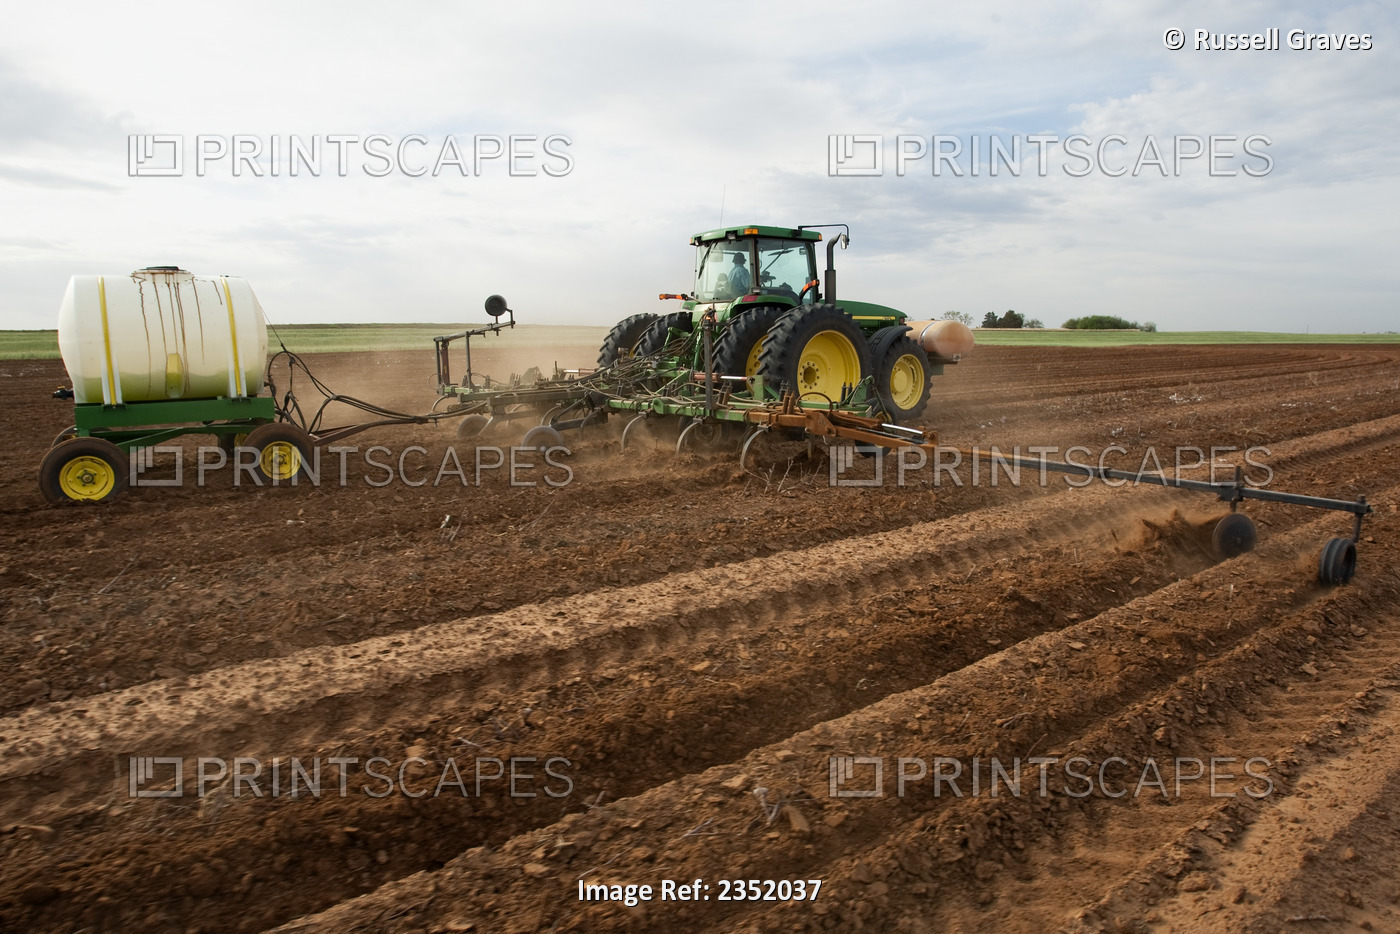 Agriculture - John Deere tractor pulling a field implement preparing a field ...